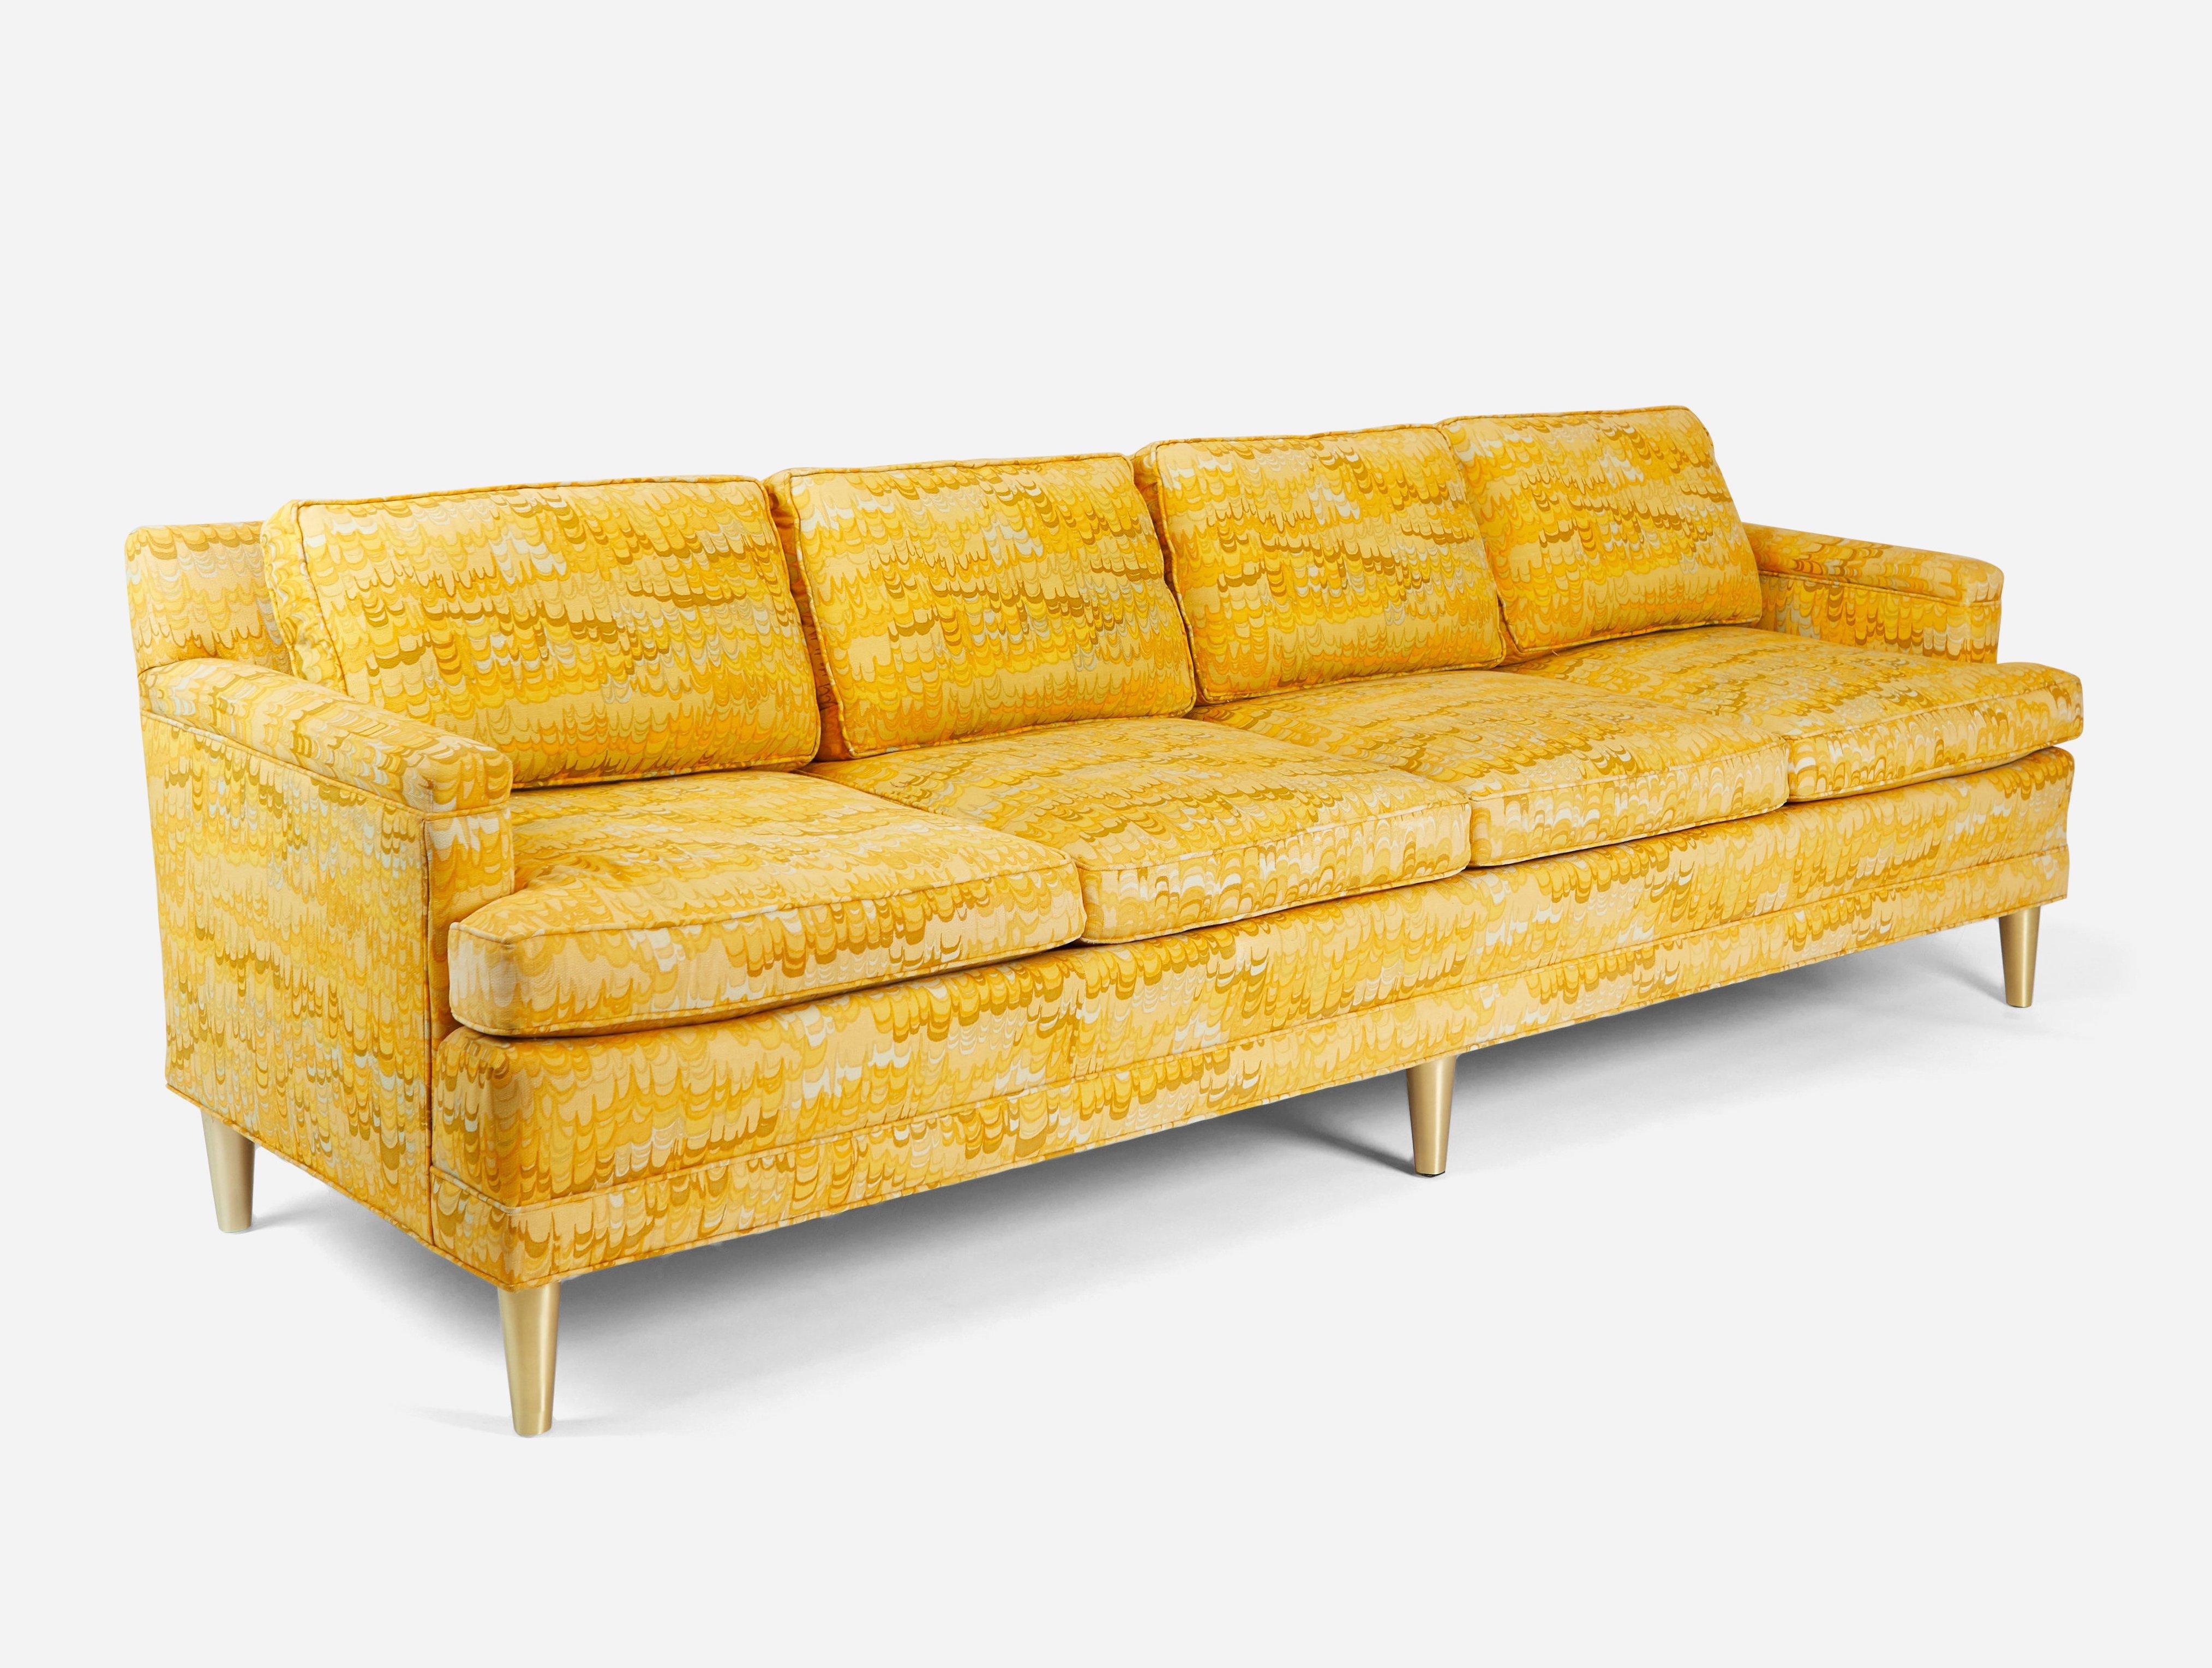 Beautiful Jack Lenor Larsen sofa on brass legs. 8' long. Original fabric with down filled cushions. We also have an 11 foot version of this sofa available separately.